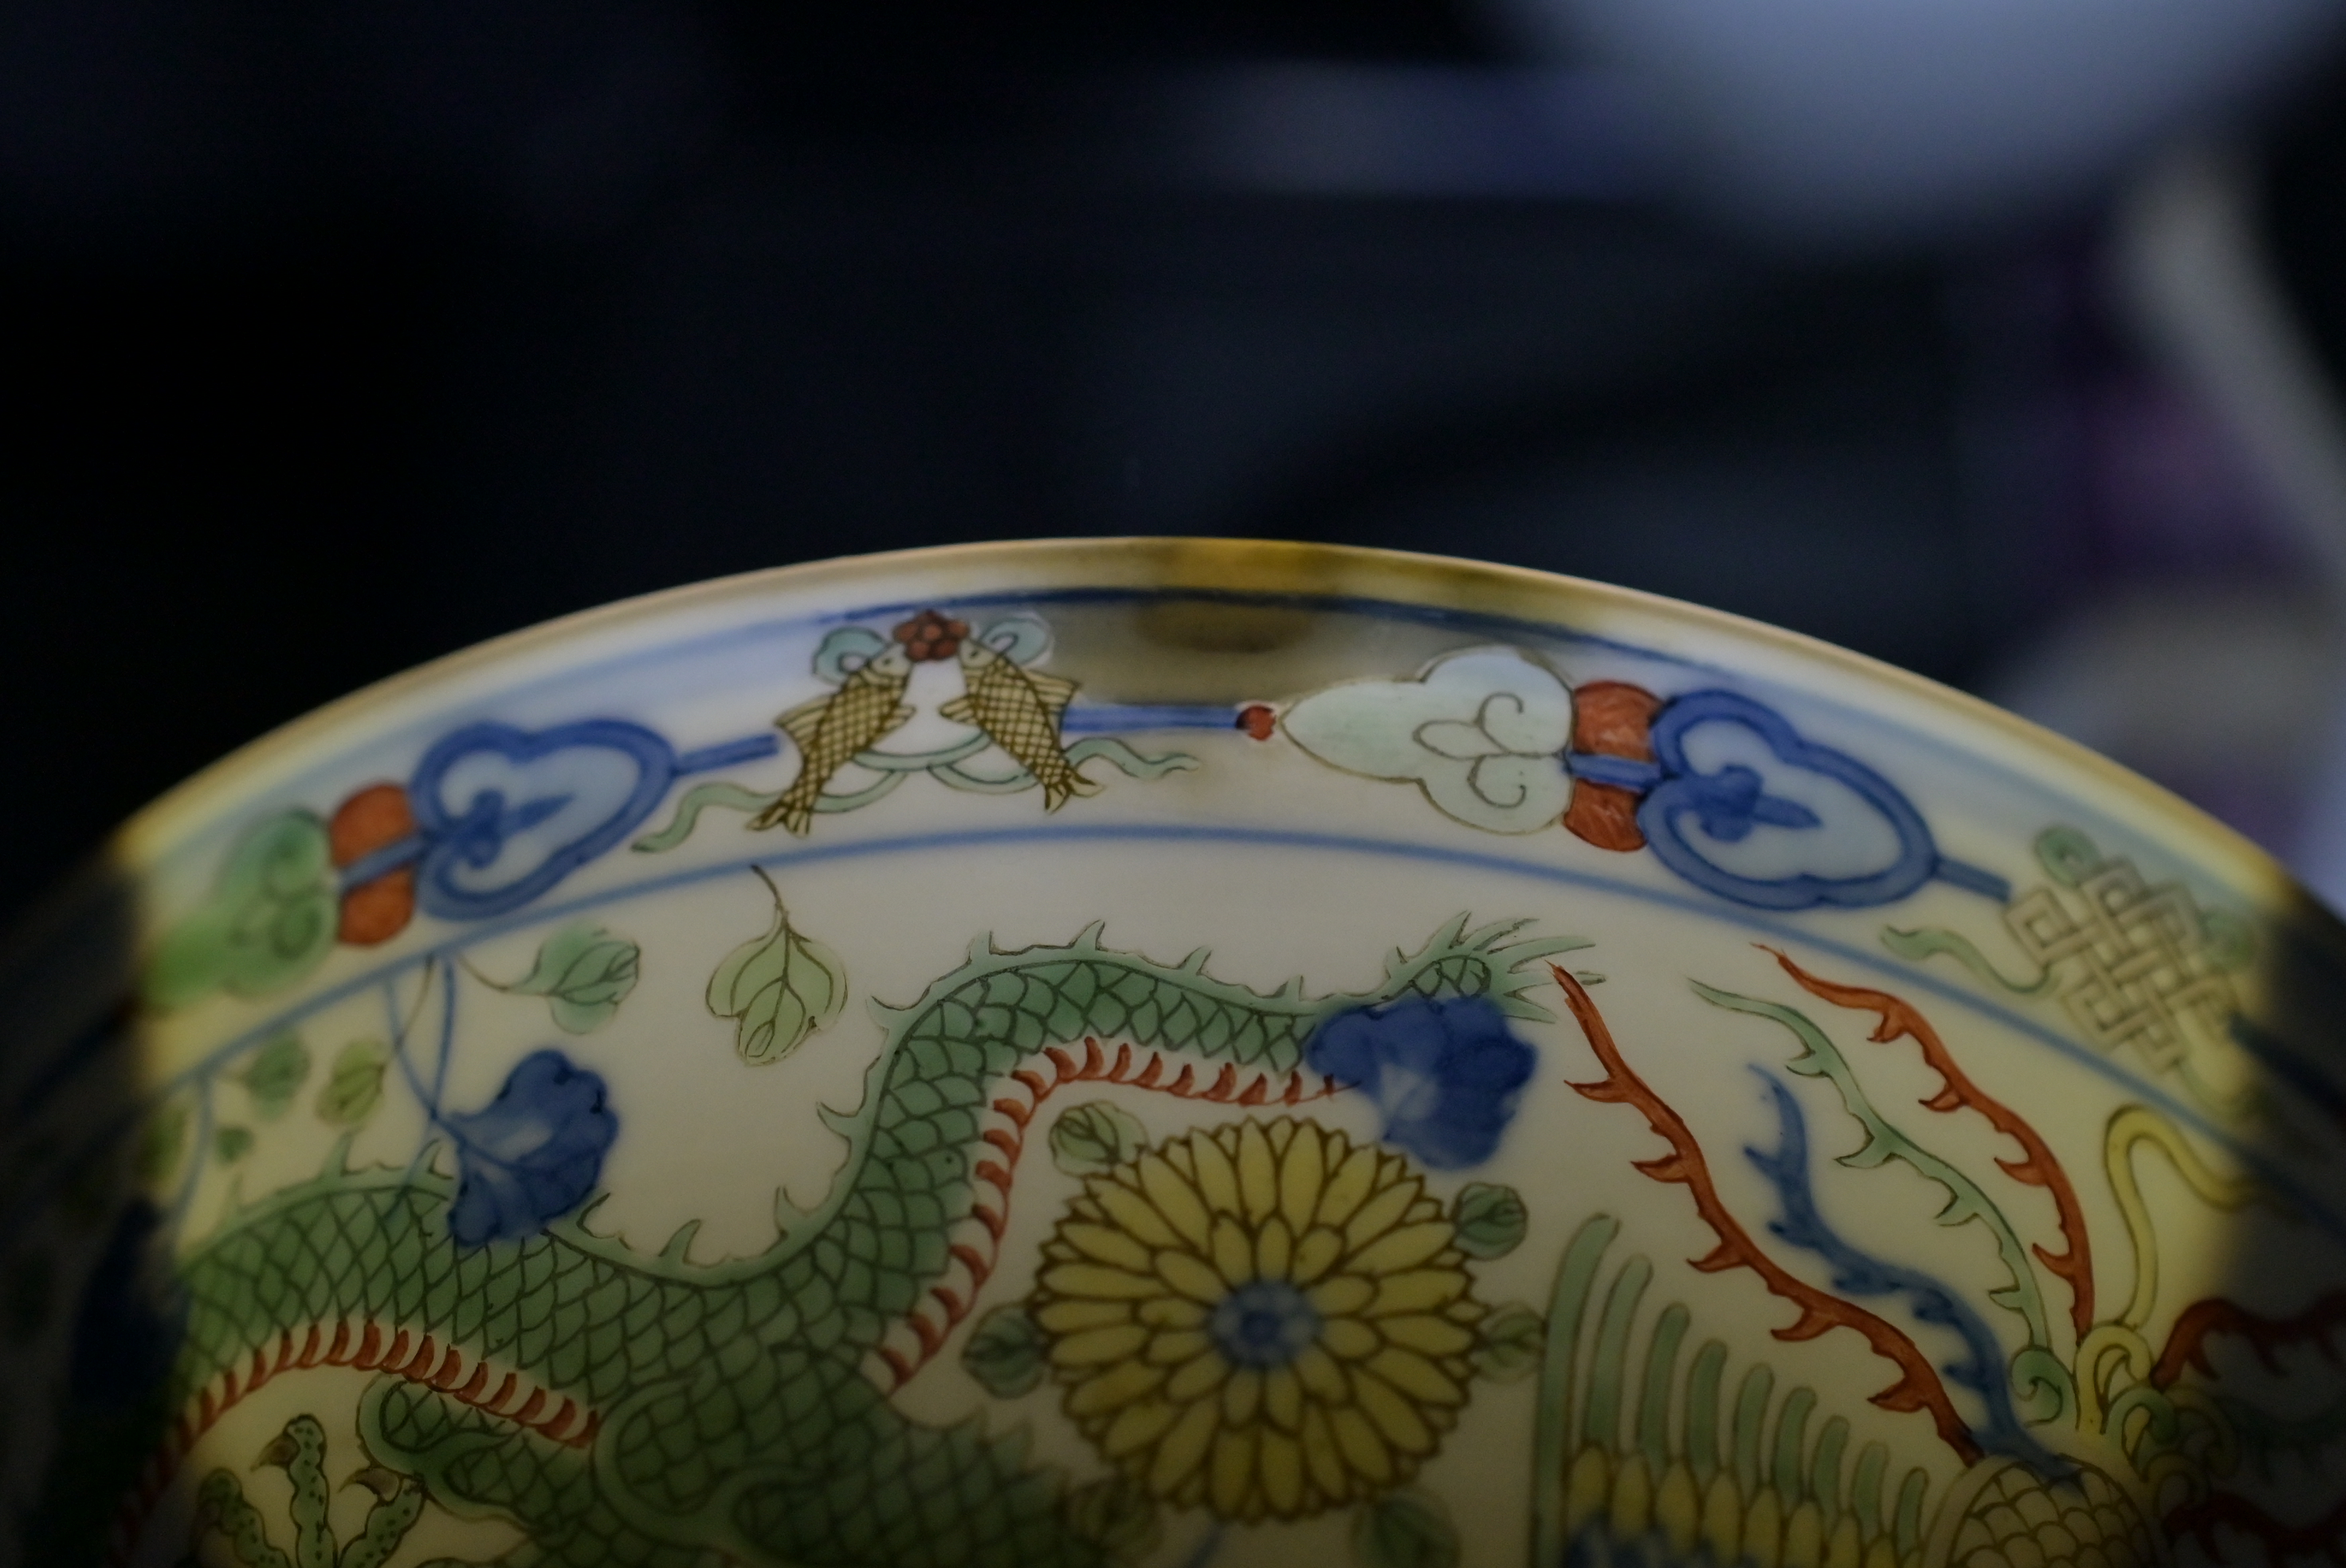 FINE CHINESE WUCAI ‘DRAGON & PHOENIX’ PORCELAIN BOWL, JIAQING MARK AND PERIOD, EARLY 19th CENTURY - Image 12 of 14